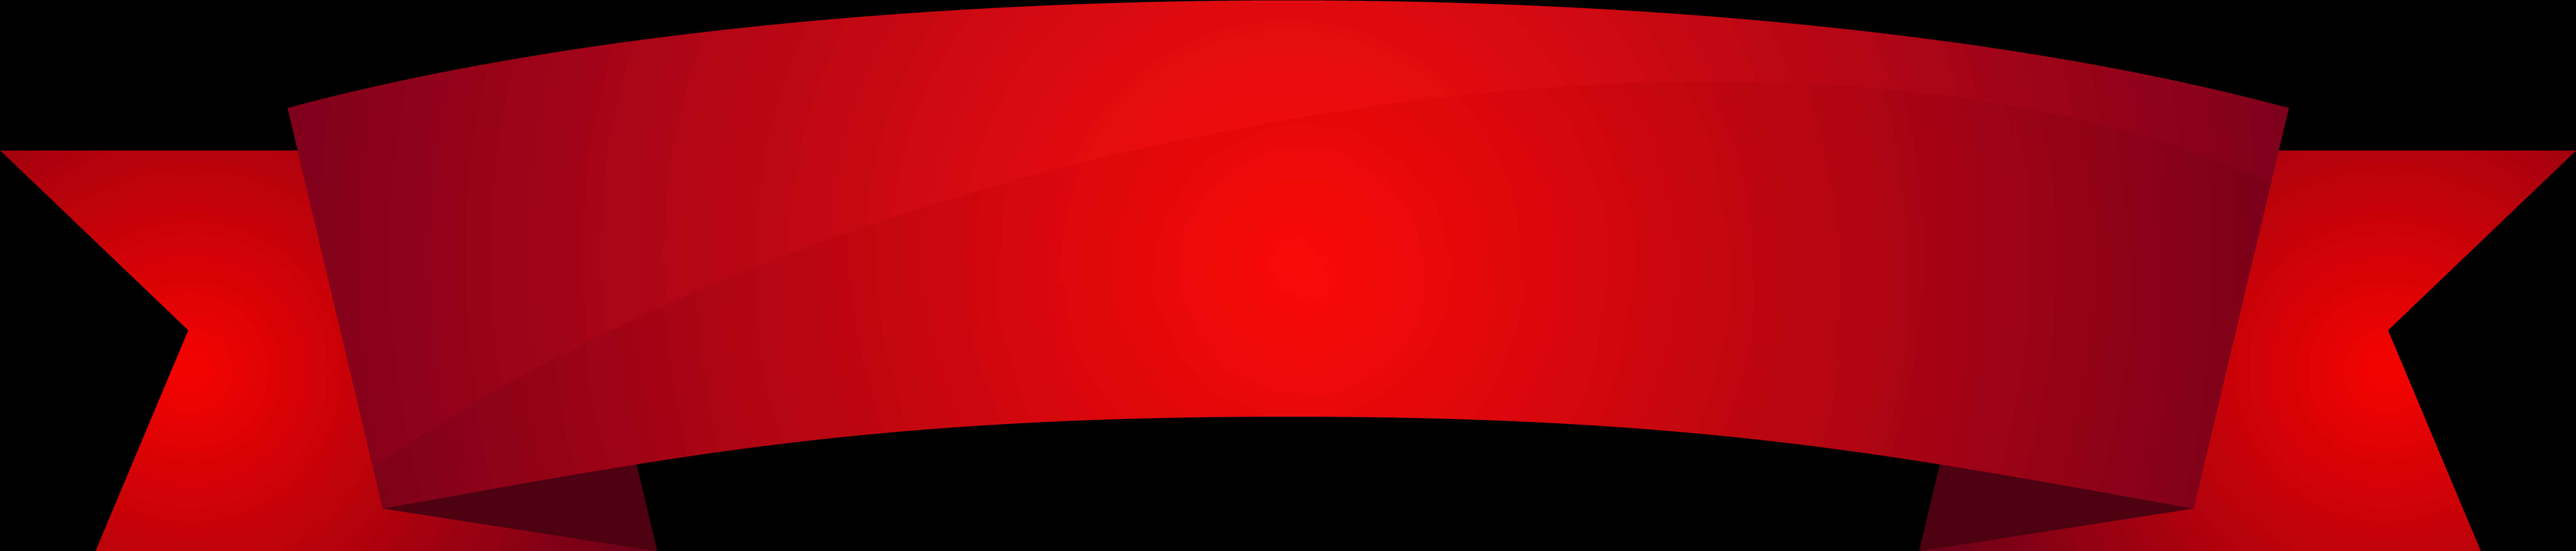 A Red Screen With Black Background